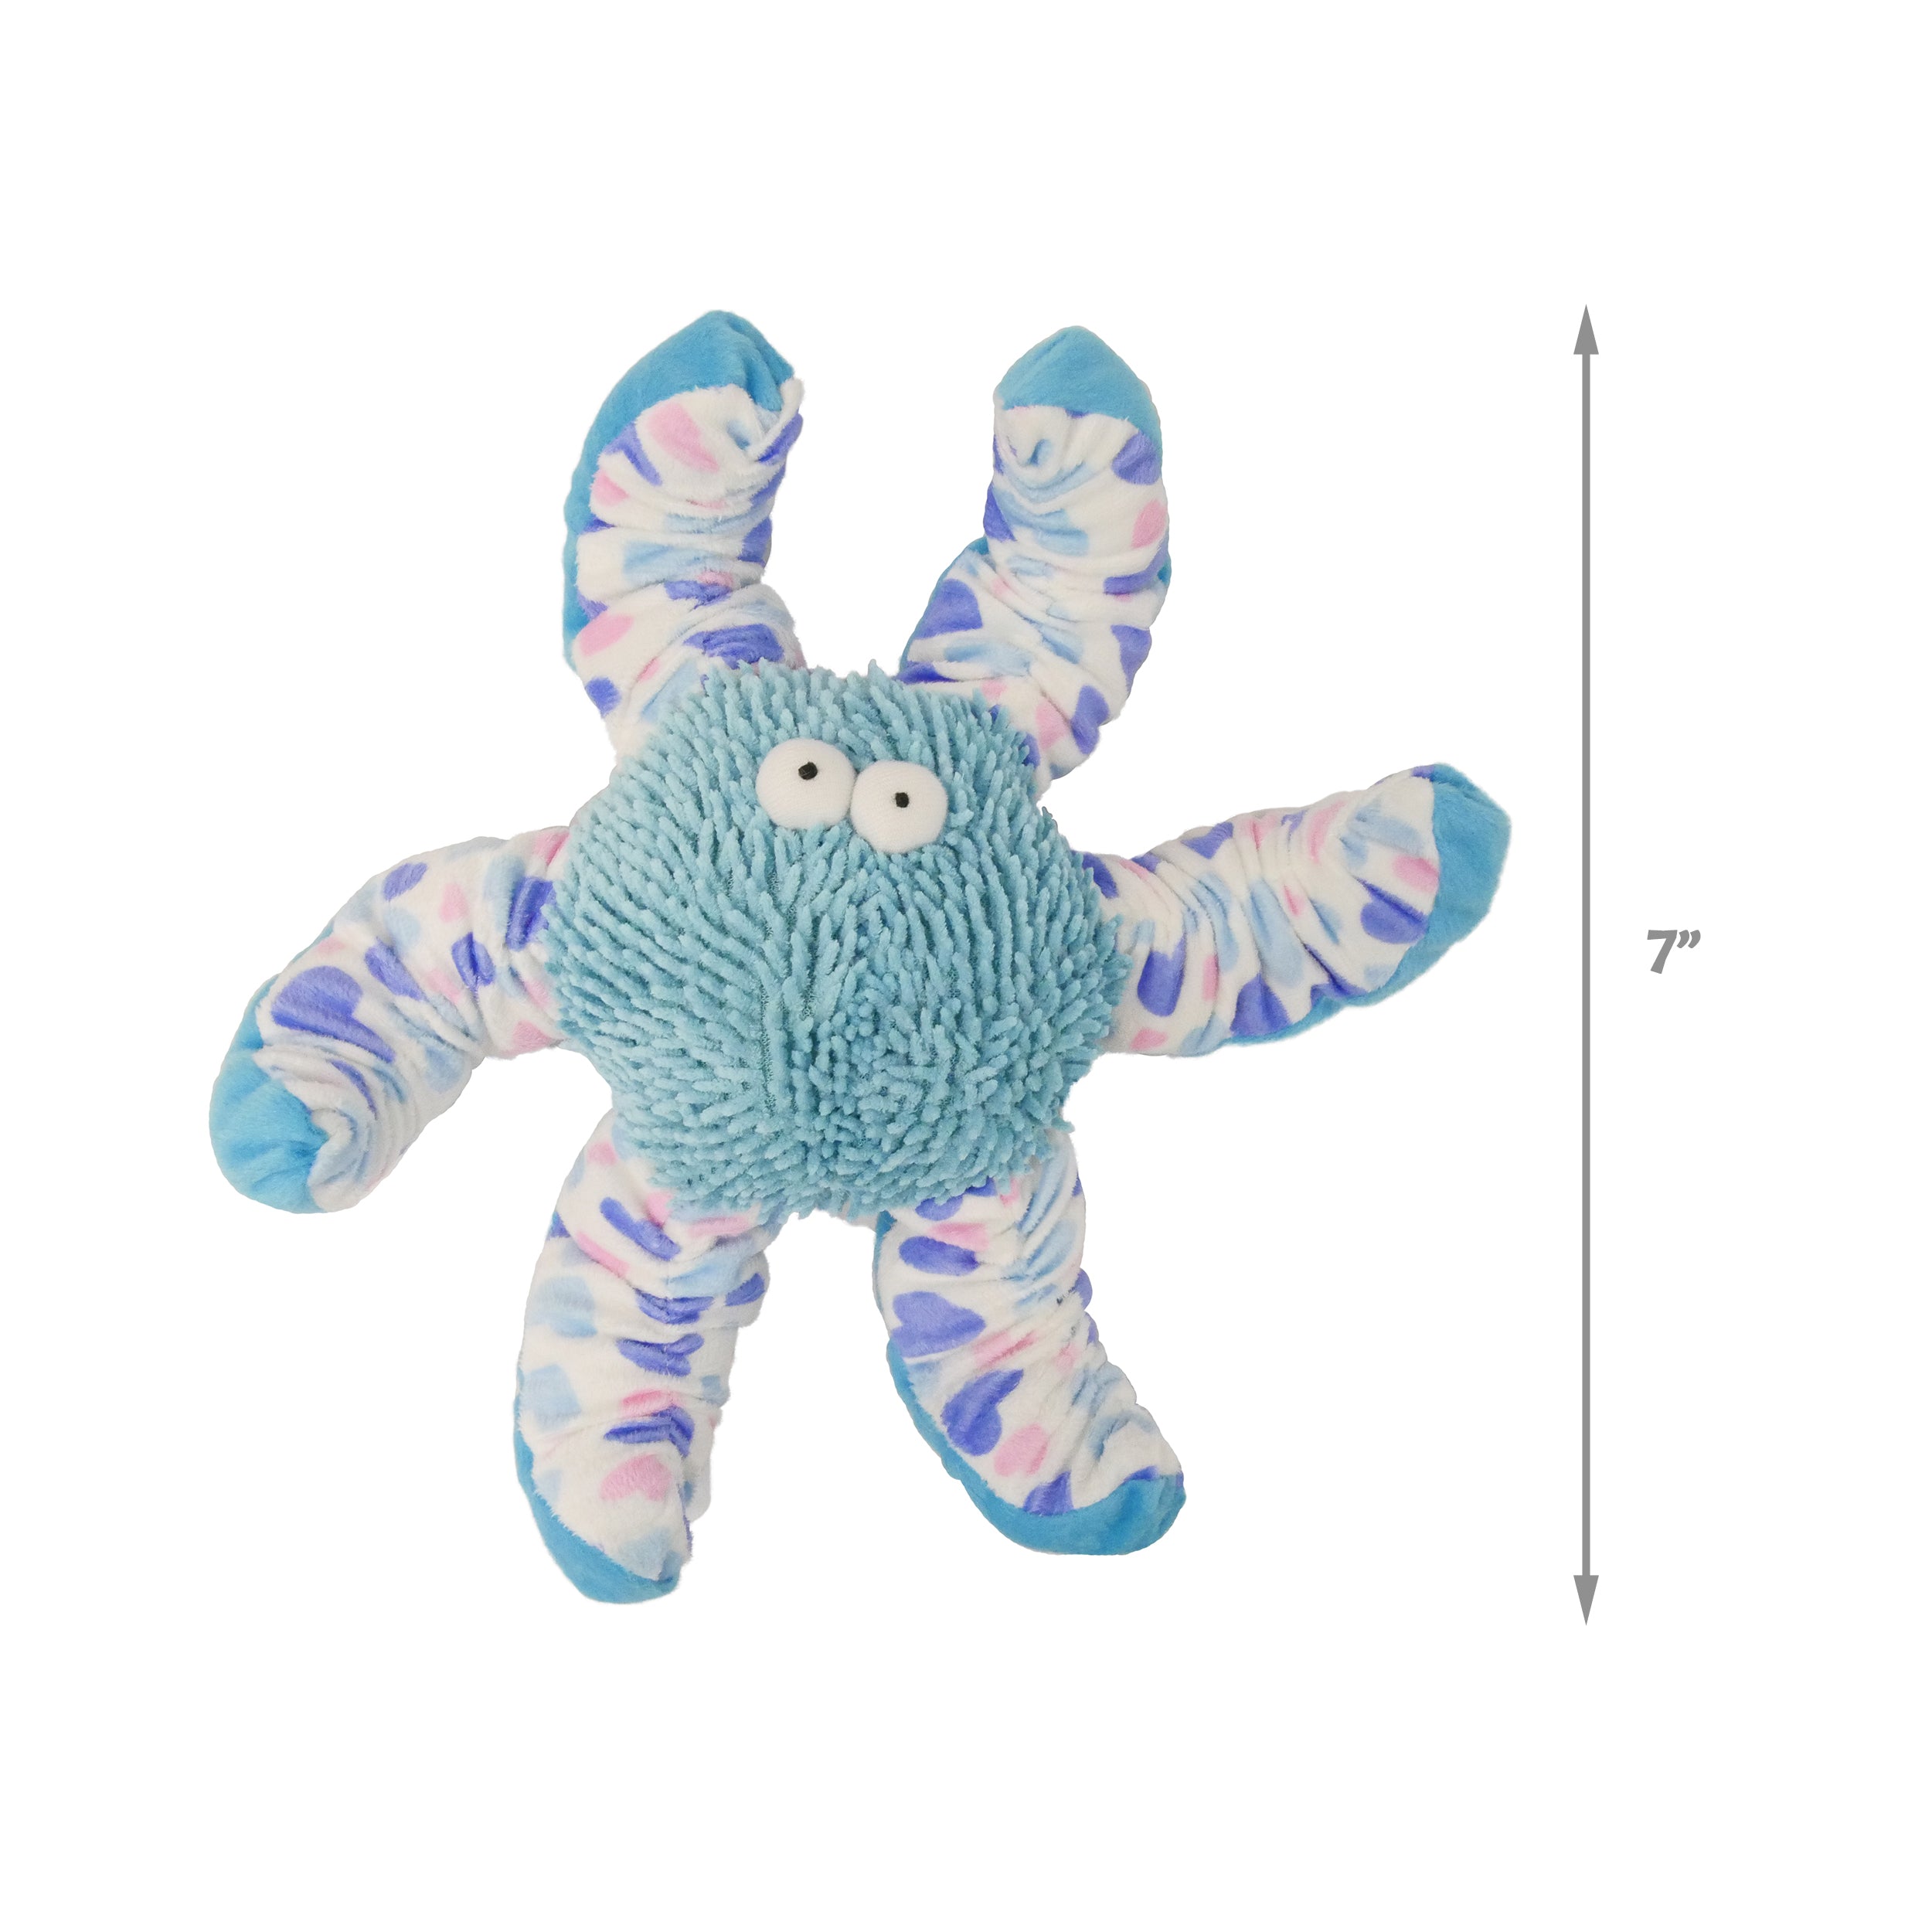 [Dog toy] 3-Colors Plush Shaggy Chenille Suede Patterned Octopus with Squeakers